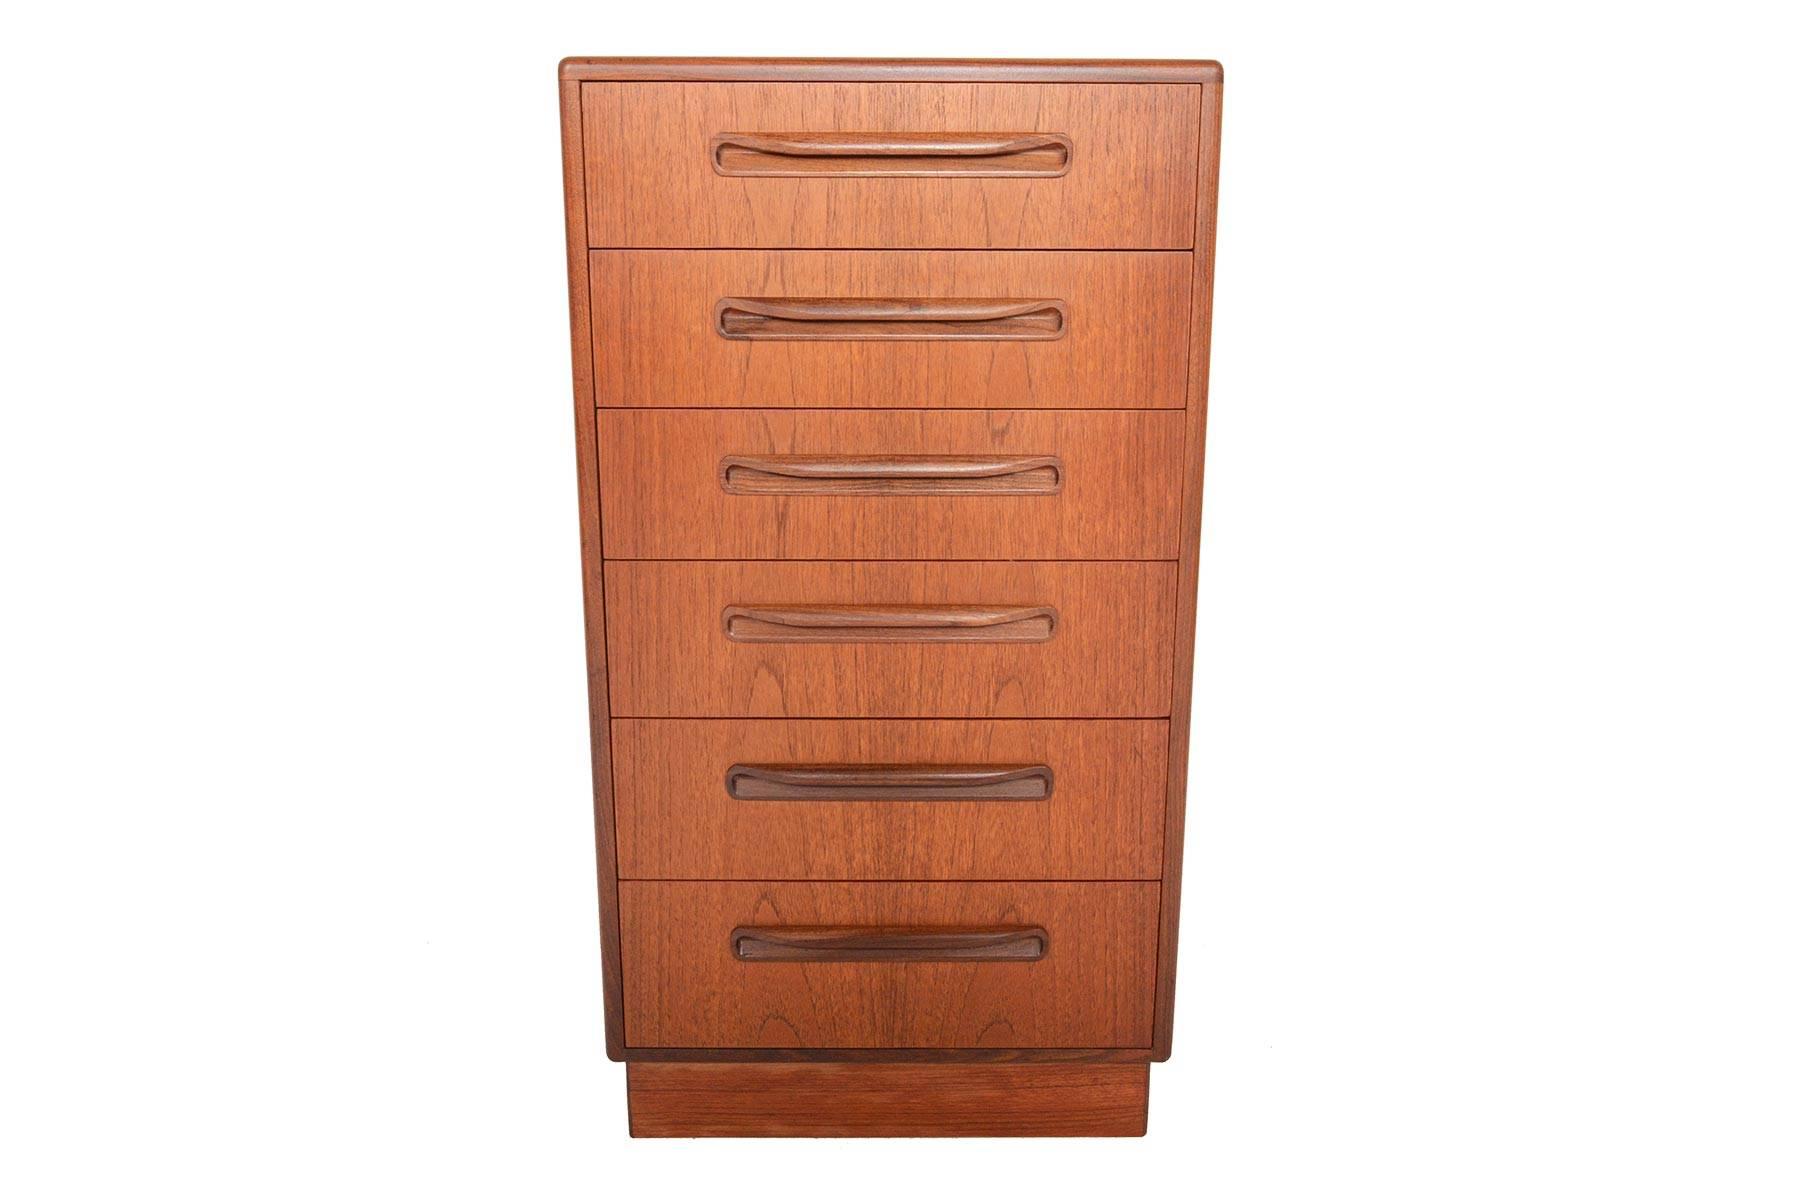 This English modern G Plan Fresco lingerie chest was designed by Victor Wilkins in the 1960s. This fantastic dresser features six deep drawers with solid teak drawer fronts and carved afrormosia pulls. With its slender design, this piece is perfect